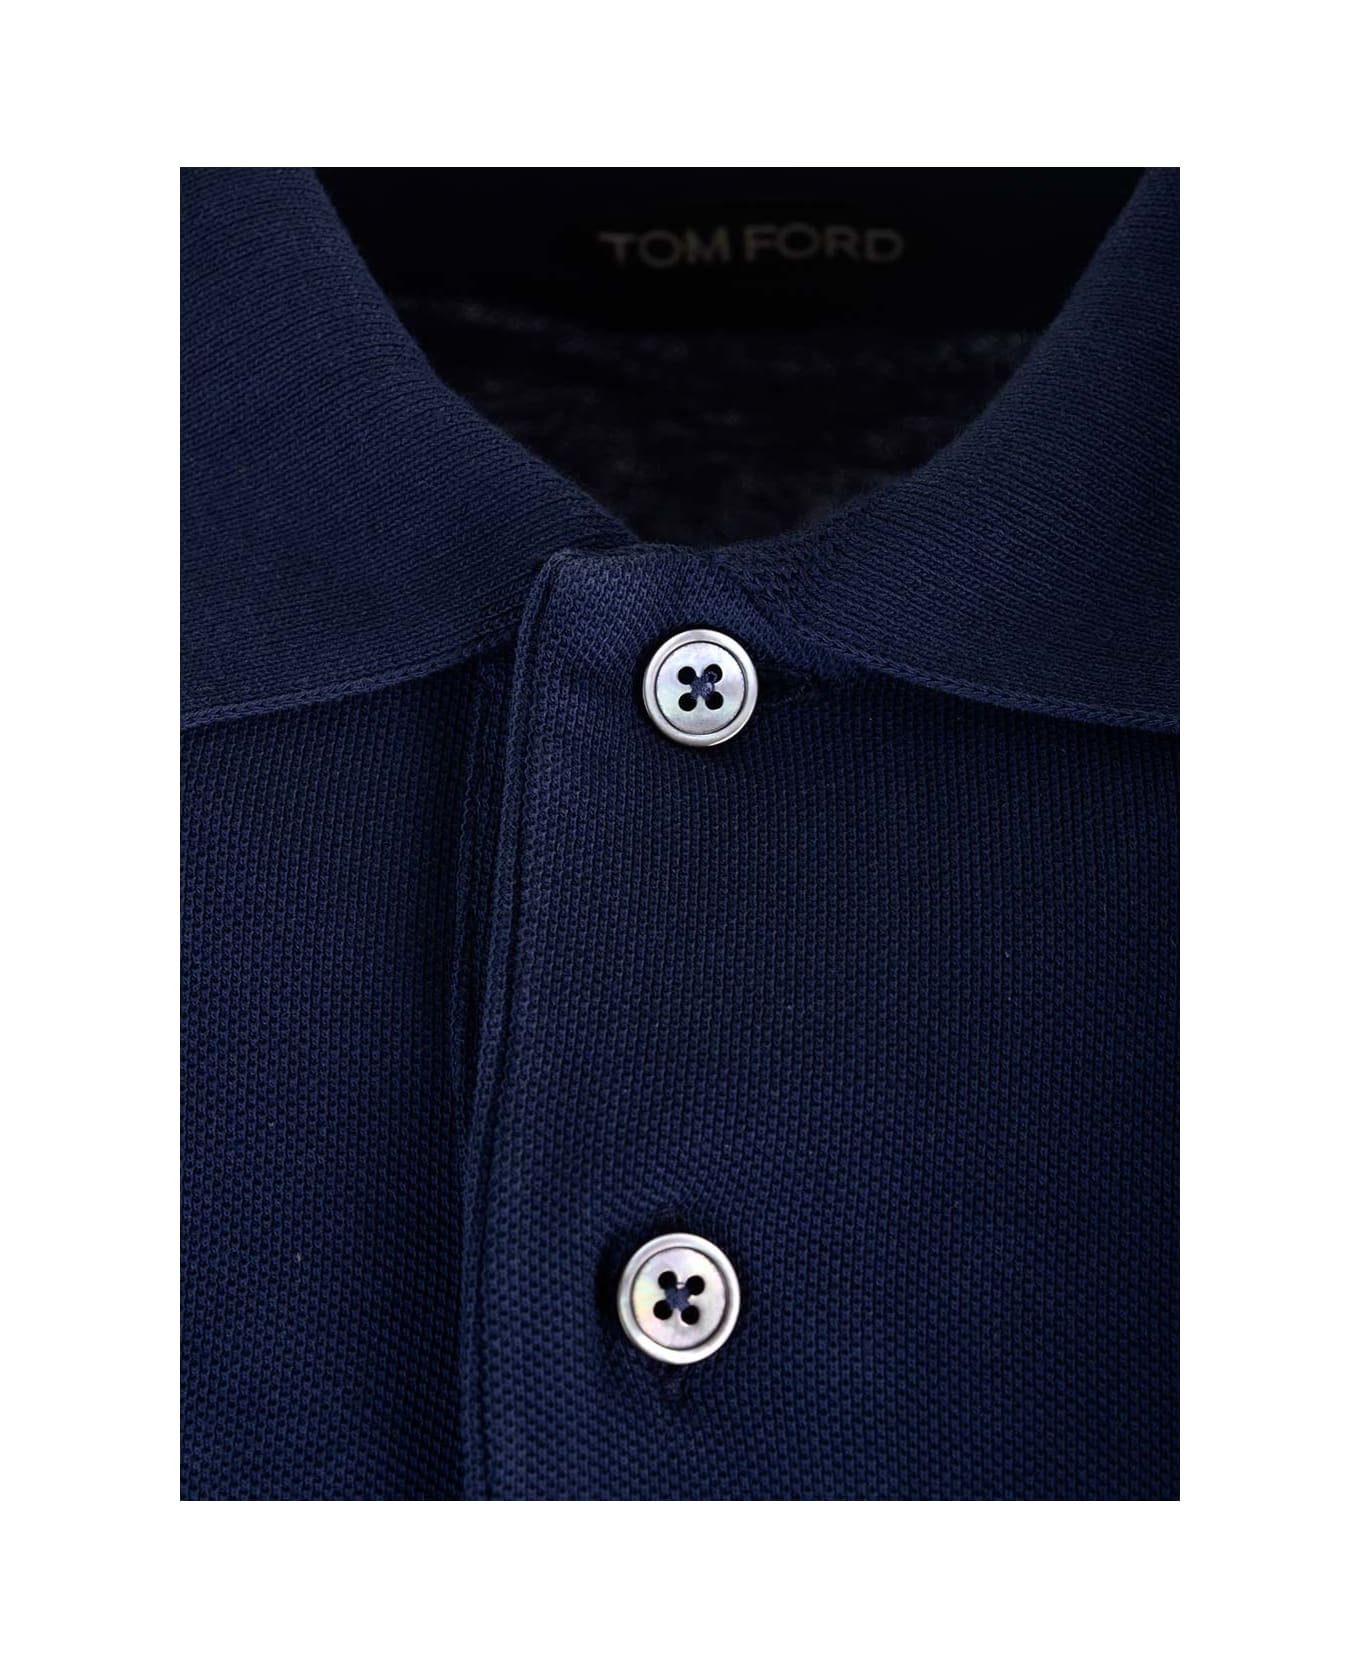 Tom Ford Navy Blue Cotton Polo Shirt - INK